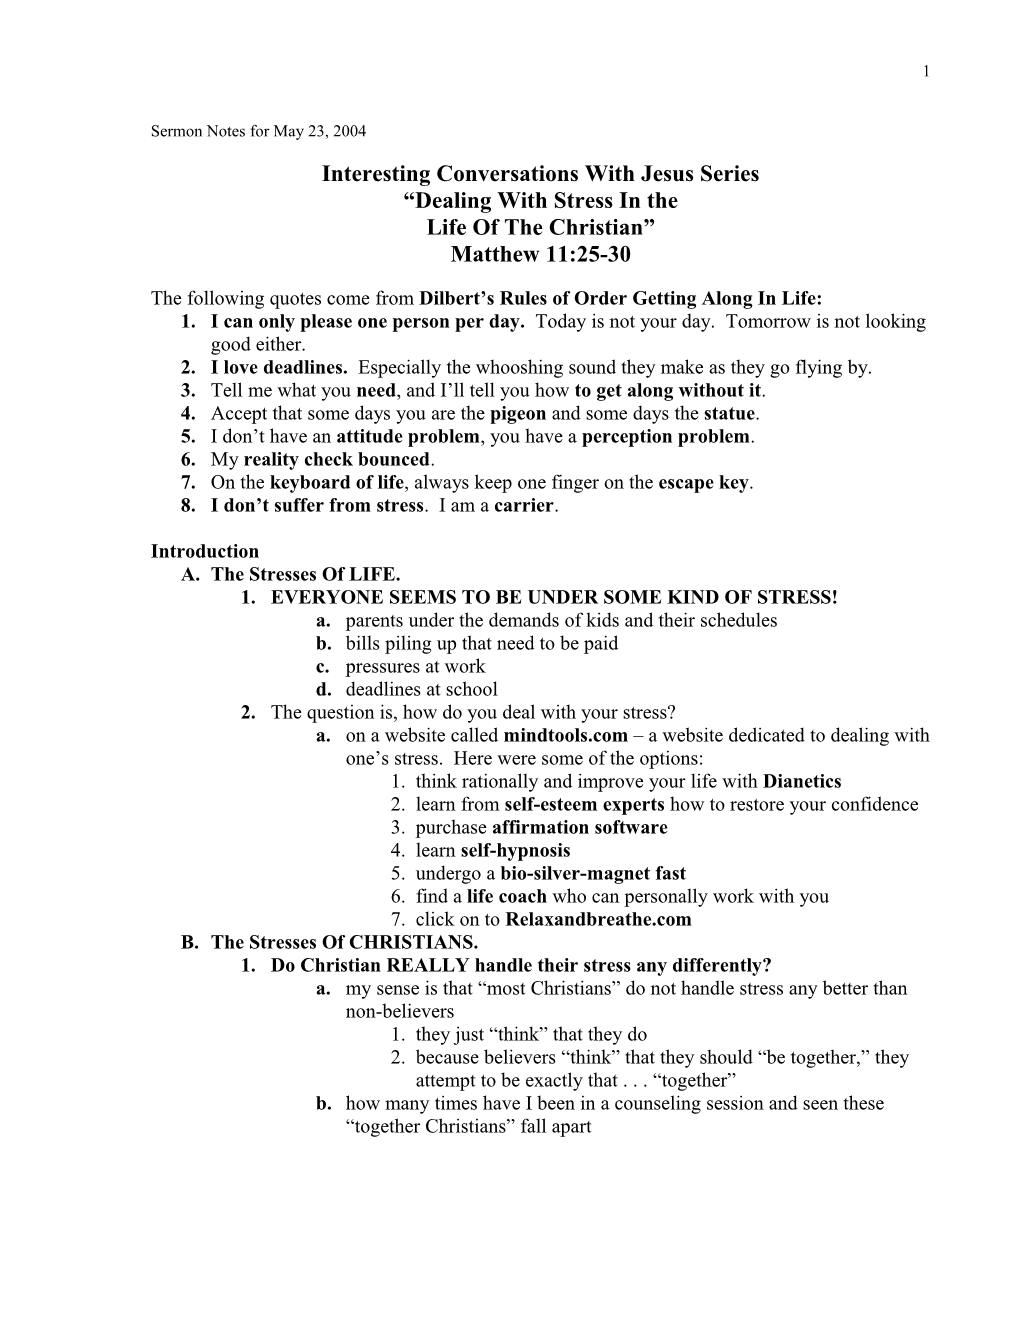 Sermon Notes for May 23, 2004